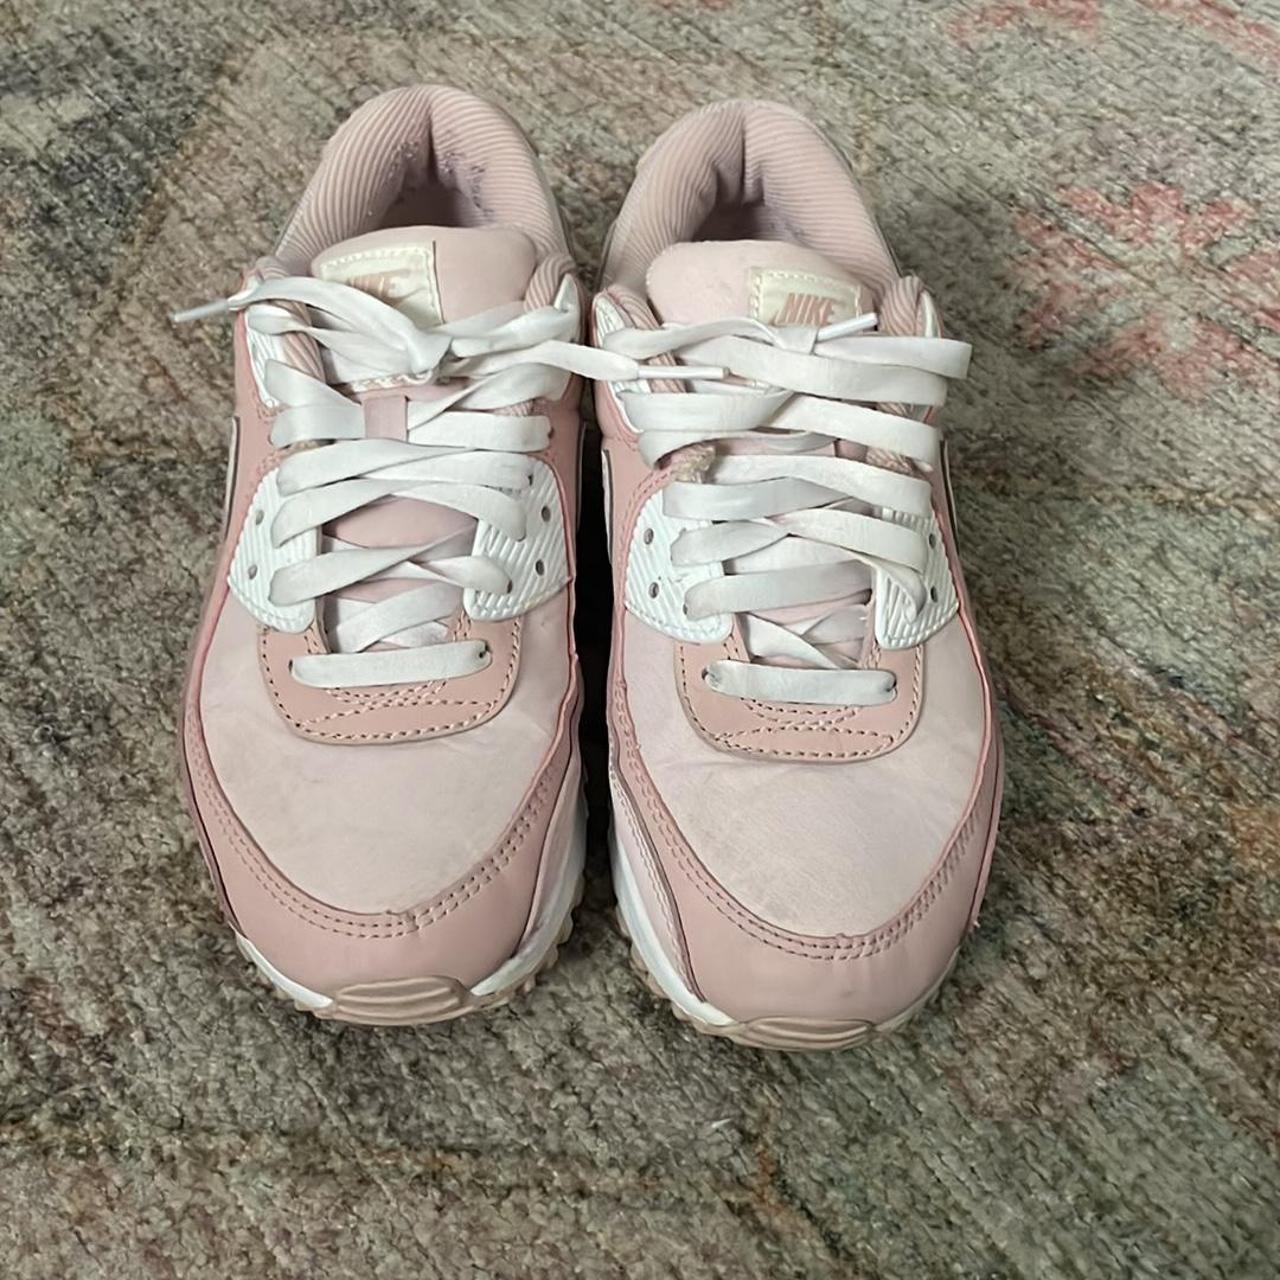 Nike Women's Pink and Cream Trainers (4)